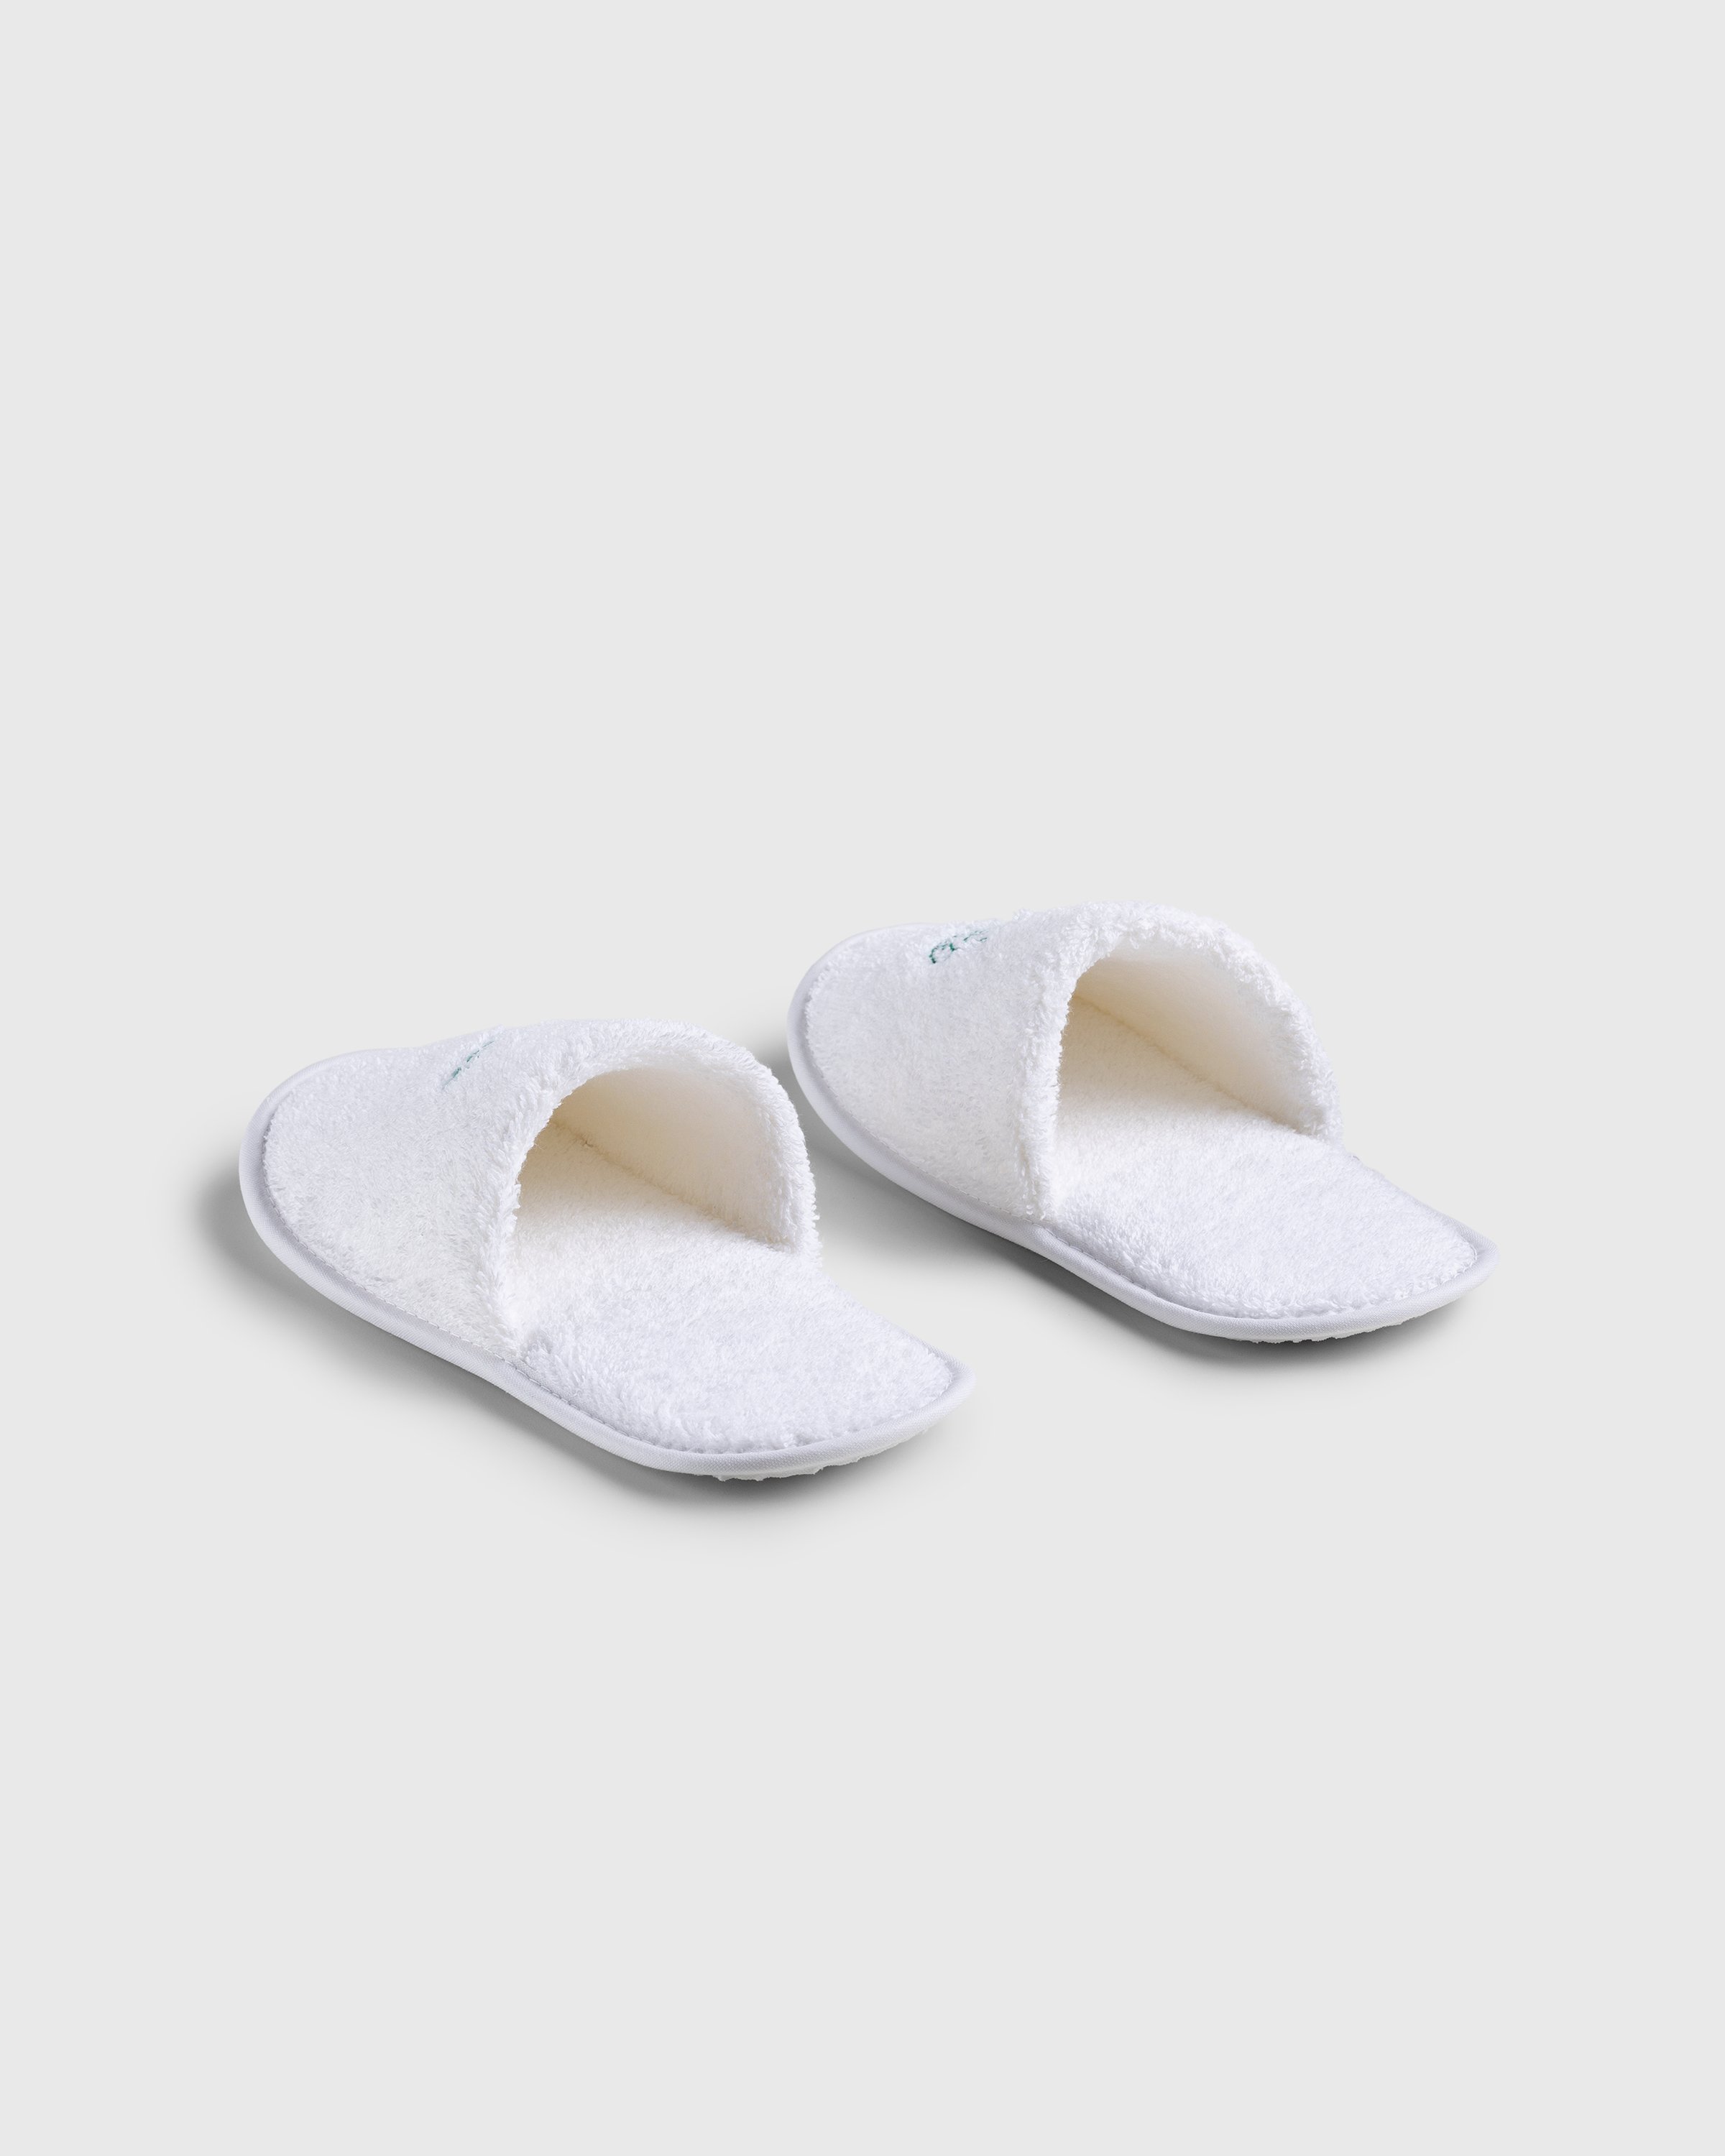 Hotel Amour x Highsnobiety - Not In Paris 4 Slippers White - Footwear - White - Image 5